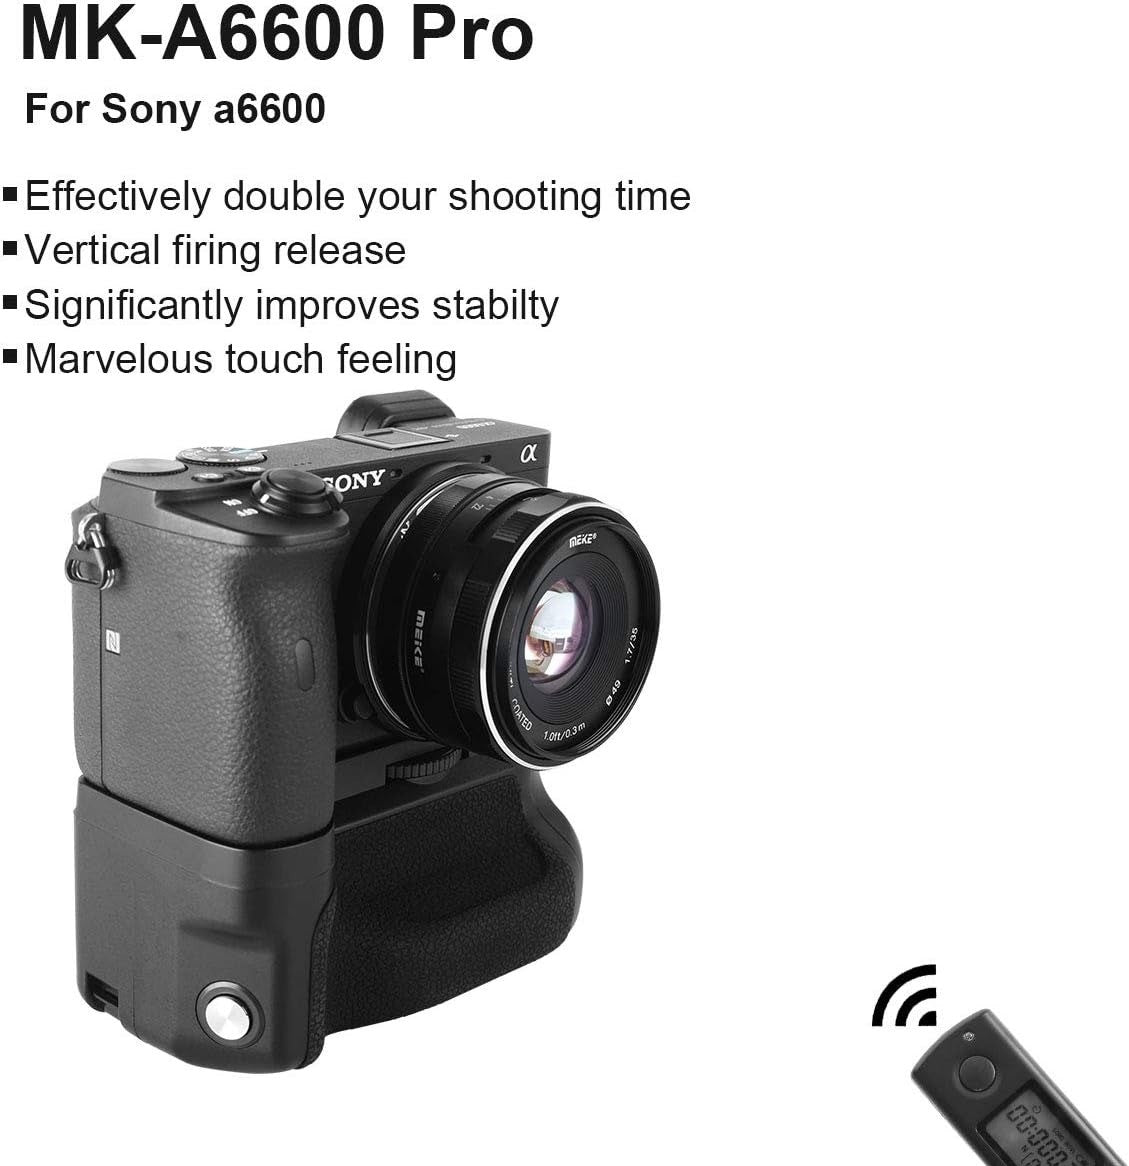 Meike MK-A6600 Pro Battery Grip for Sony A6600 Camera with Remote Control, Battery Pack, Built-in Remote Controller Up to 100m to Control Shooting Vertical-Shooting Function